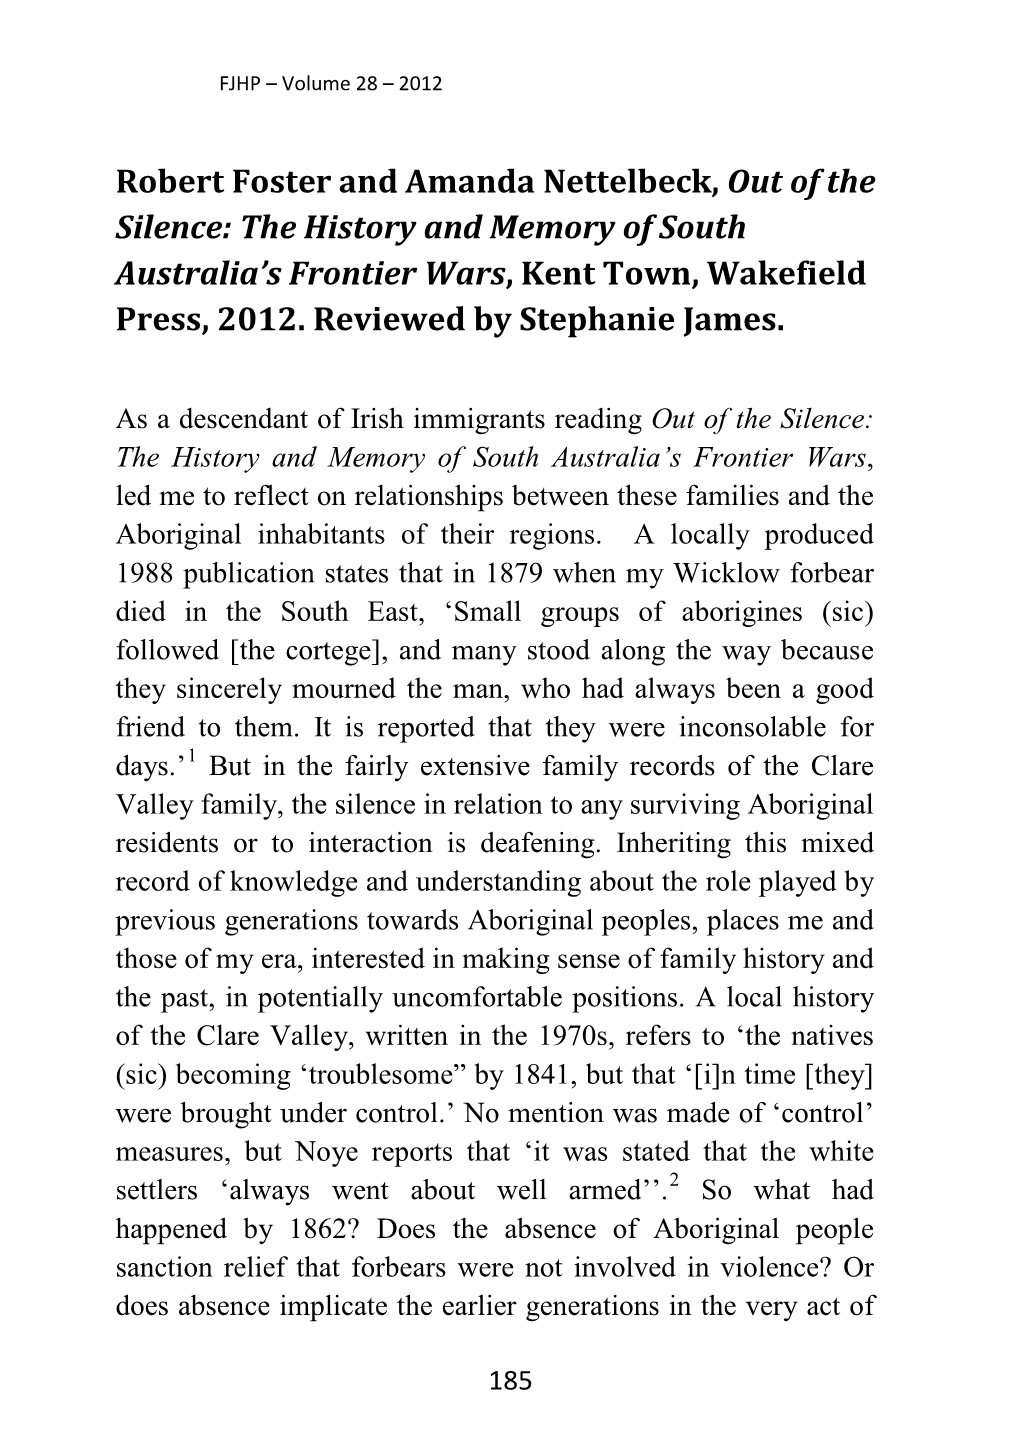 Robert Foster and Amanda Nettelbeck, out of the Silence: the History and Memory of South Australia’S Frontier Wars, Kent Town, Wakefield Press, 2012